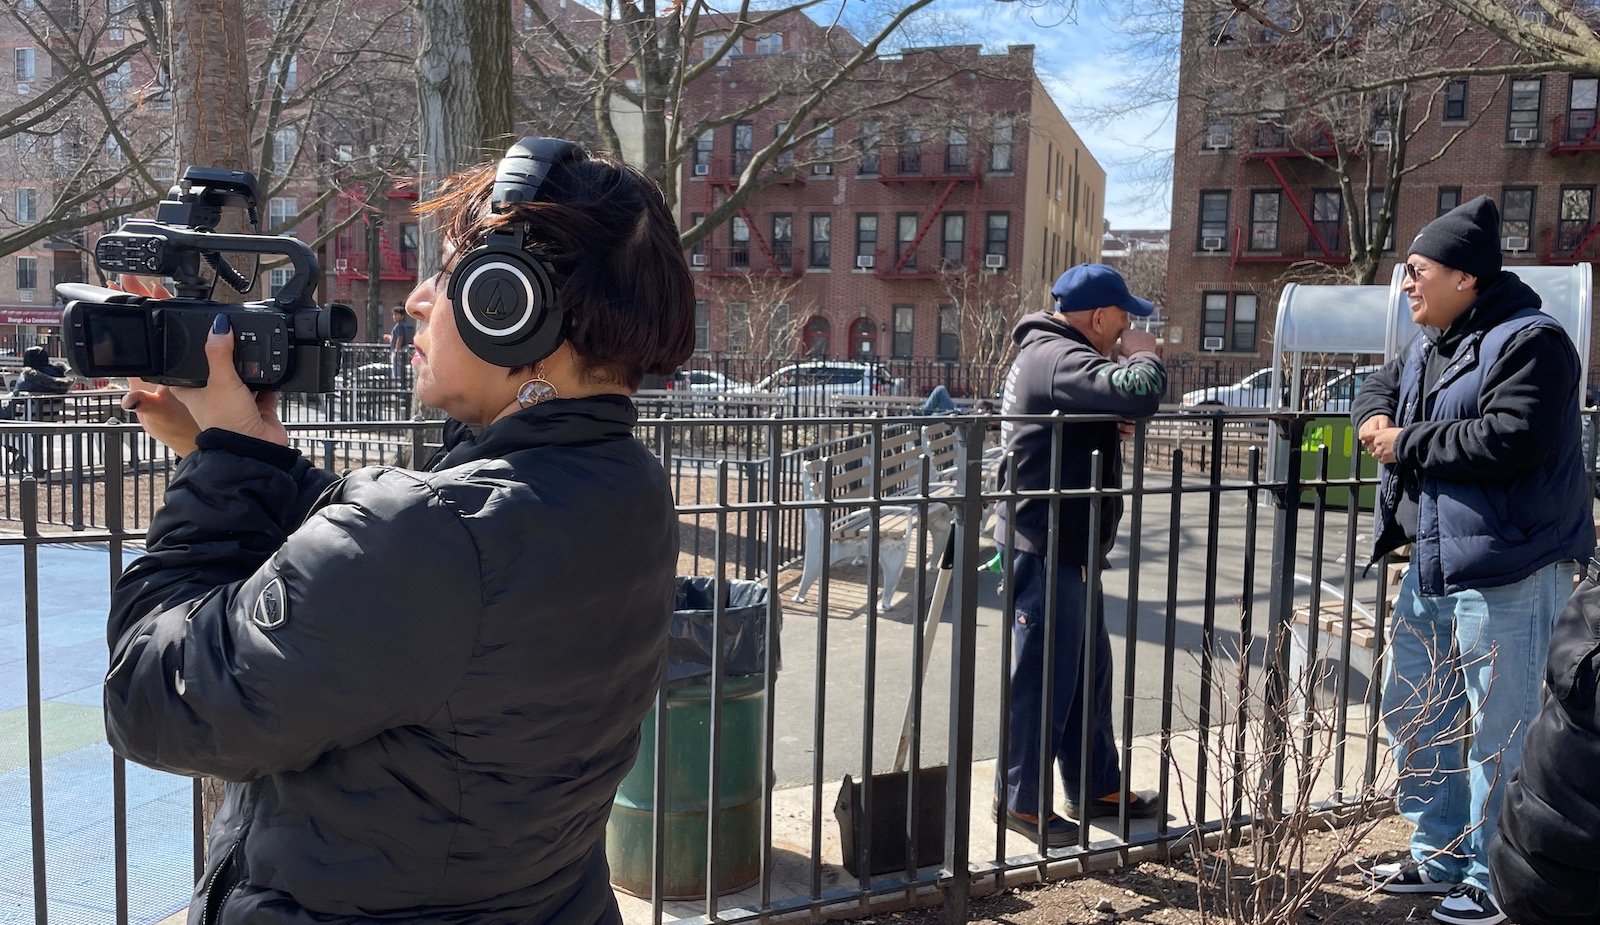 A woman holds a camera and wears headphones outside in New York, filming over an iron fence.